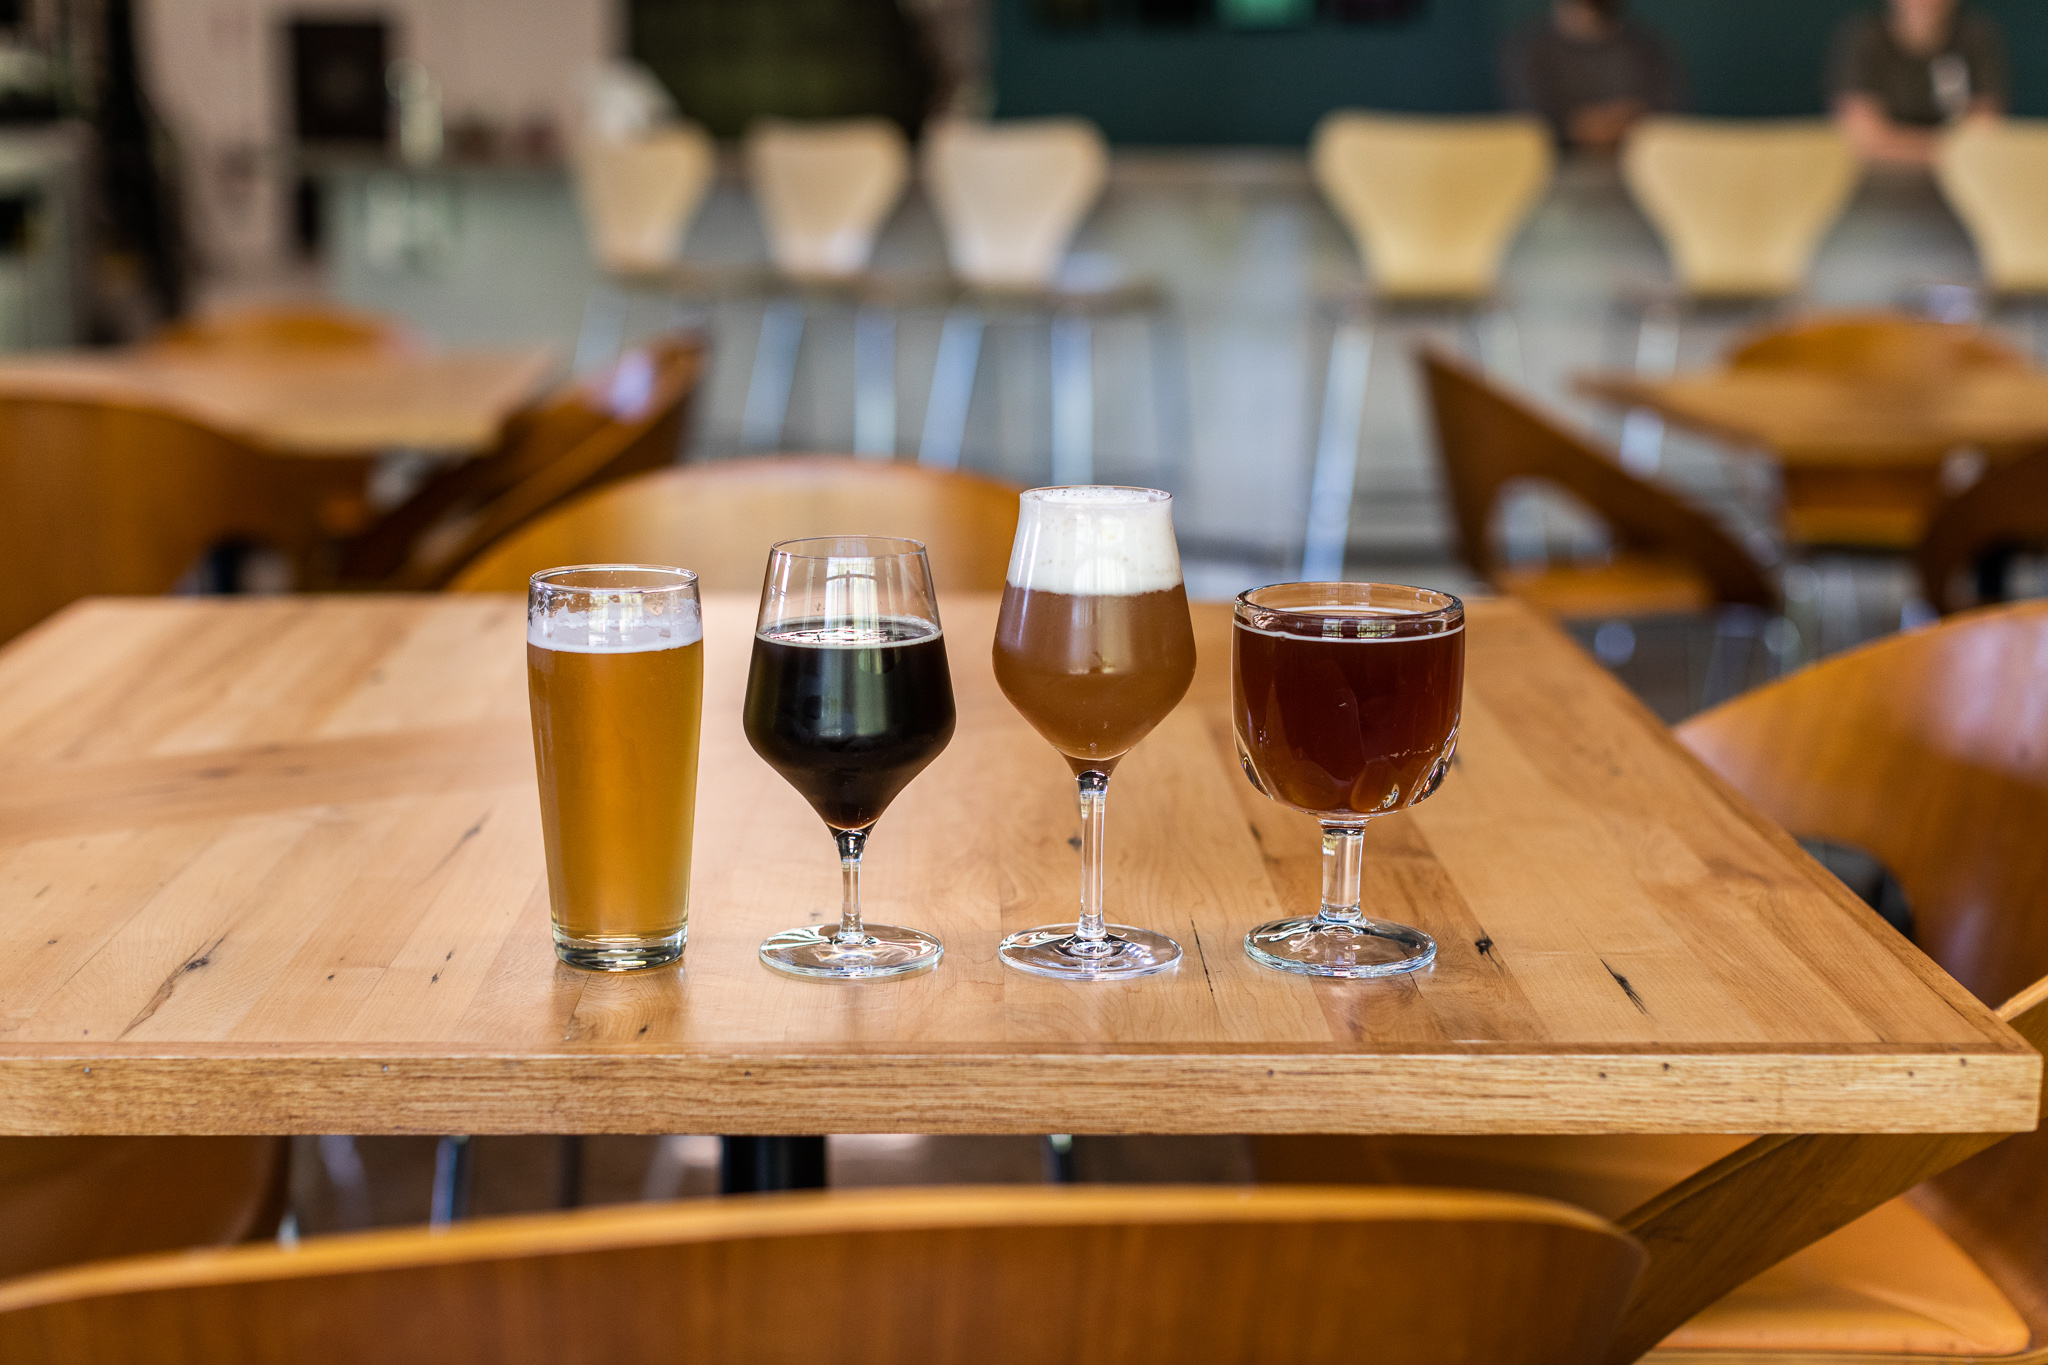 Four glasses of different colored beer in a row on a wooden table.